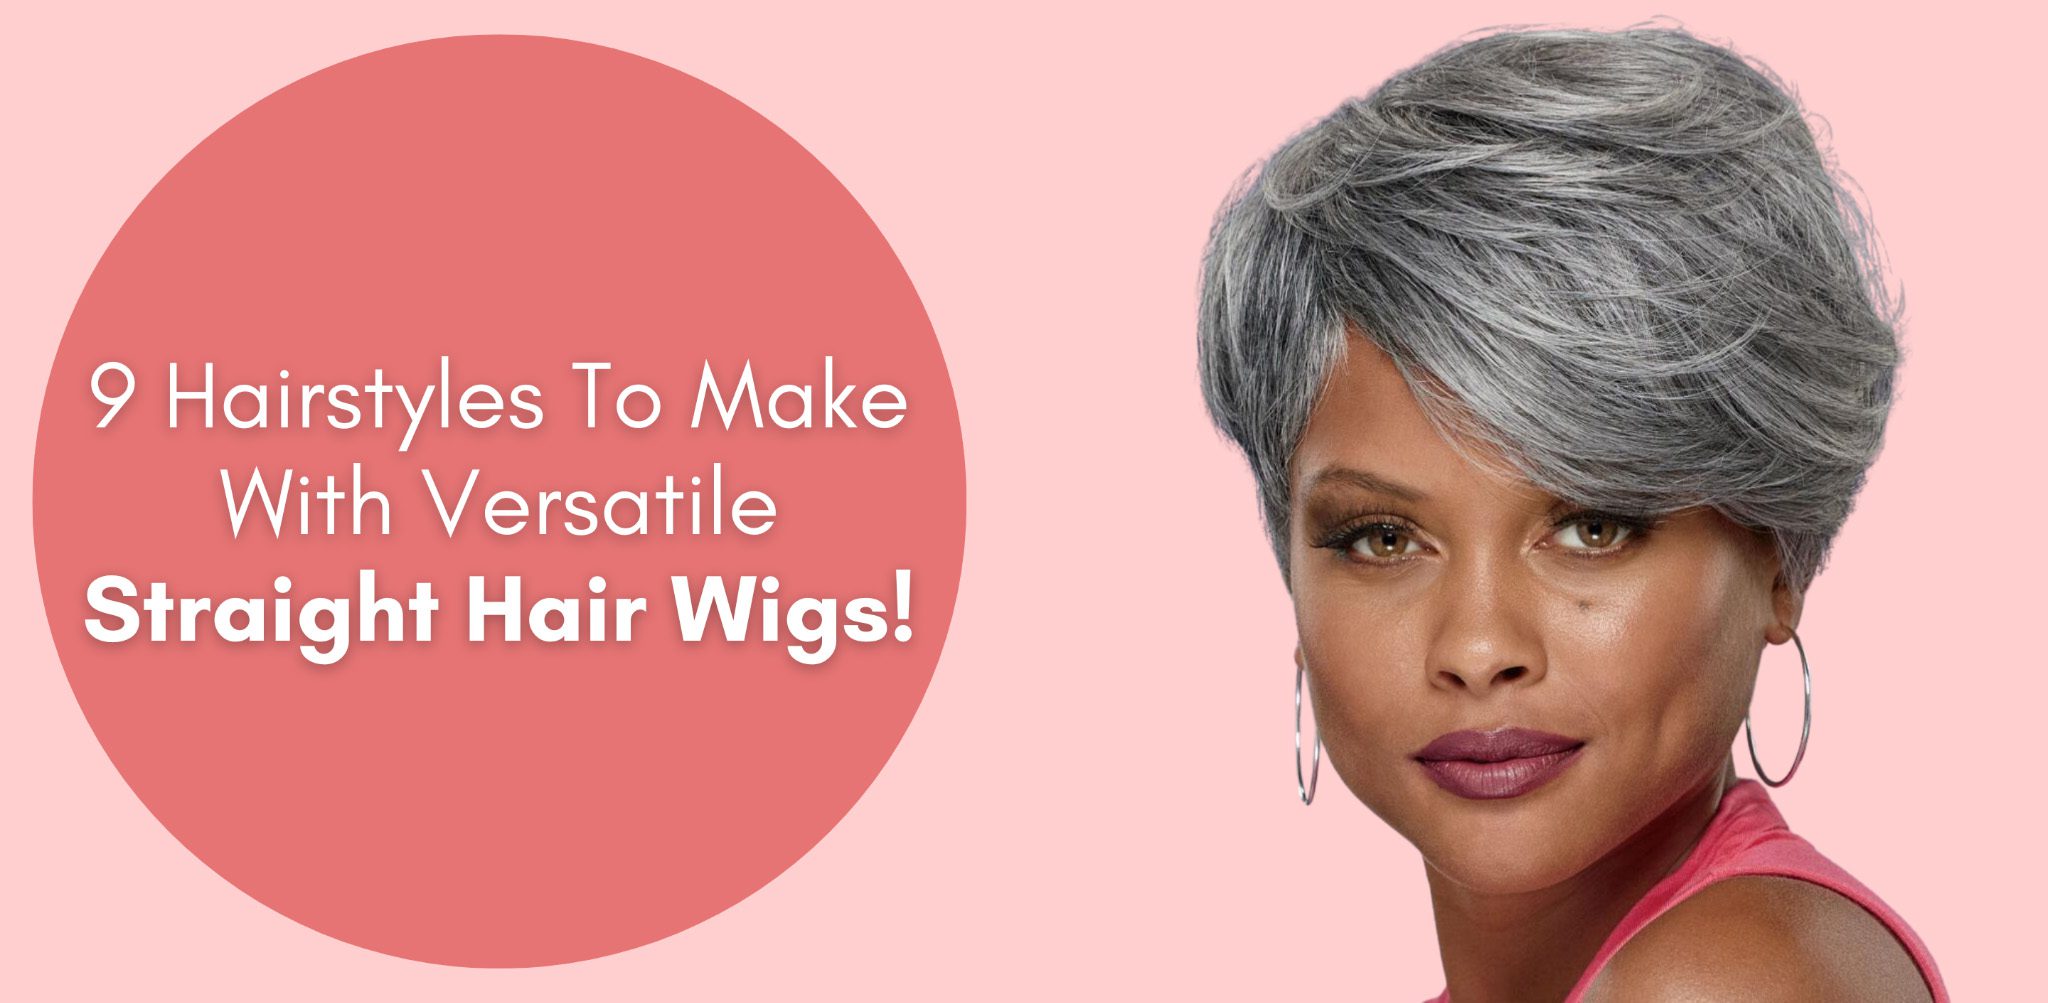 9 hairstyles to make with versatile straight hair wigs